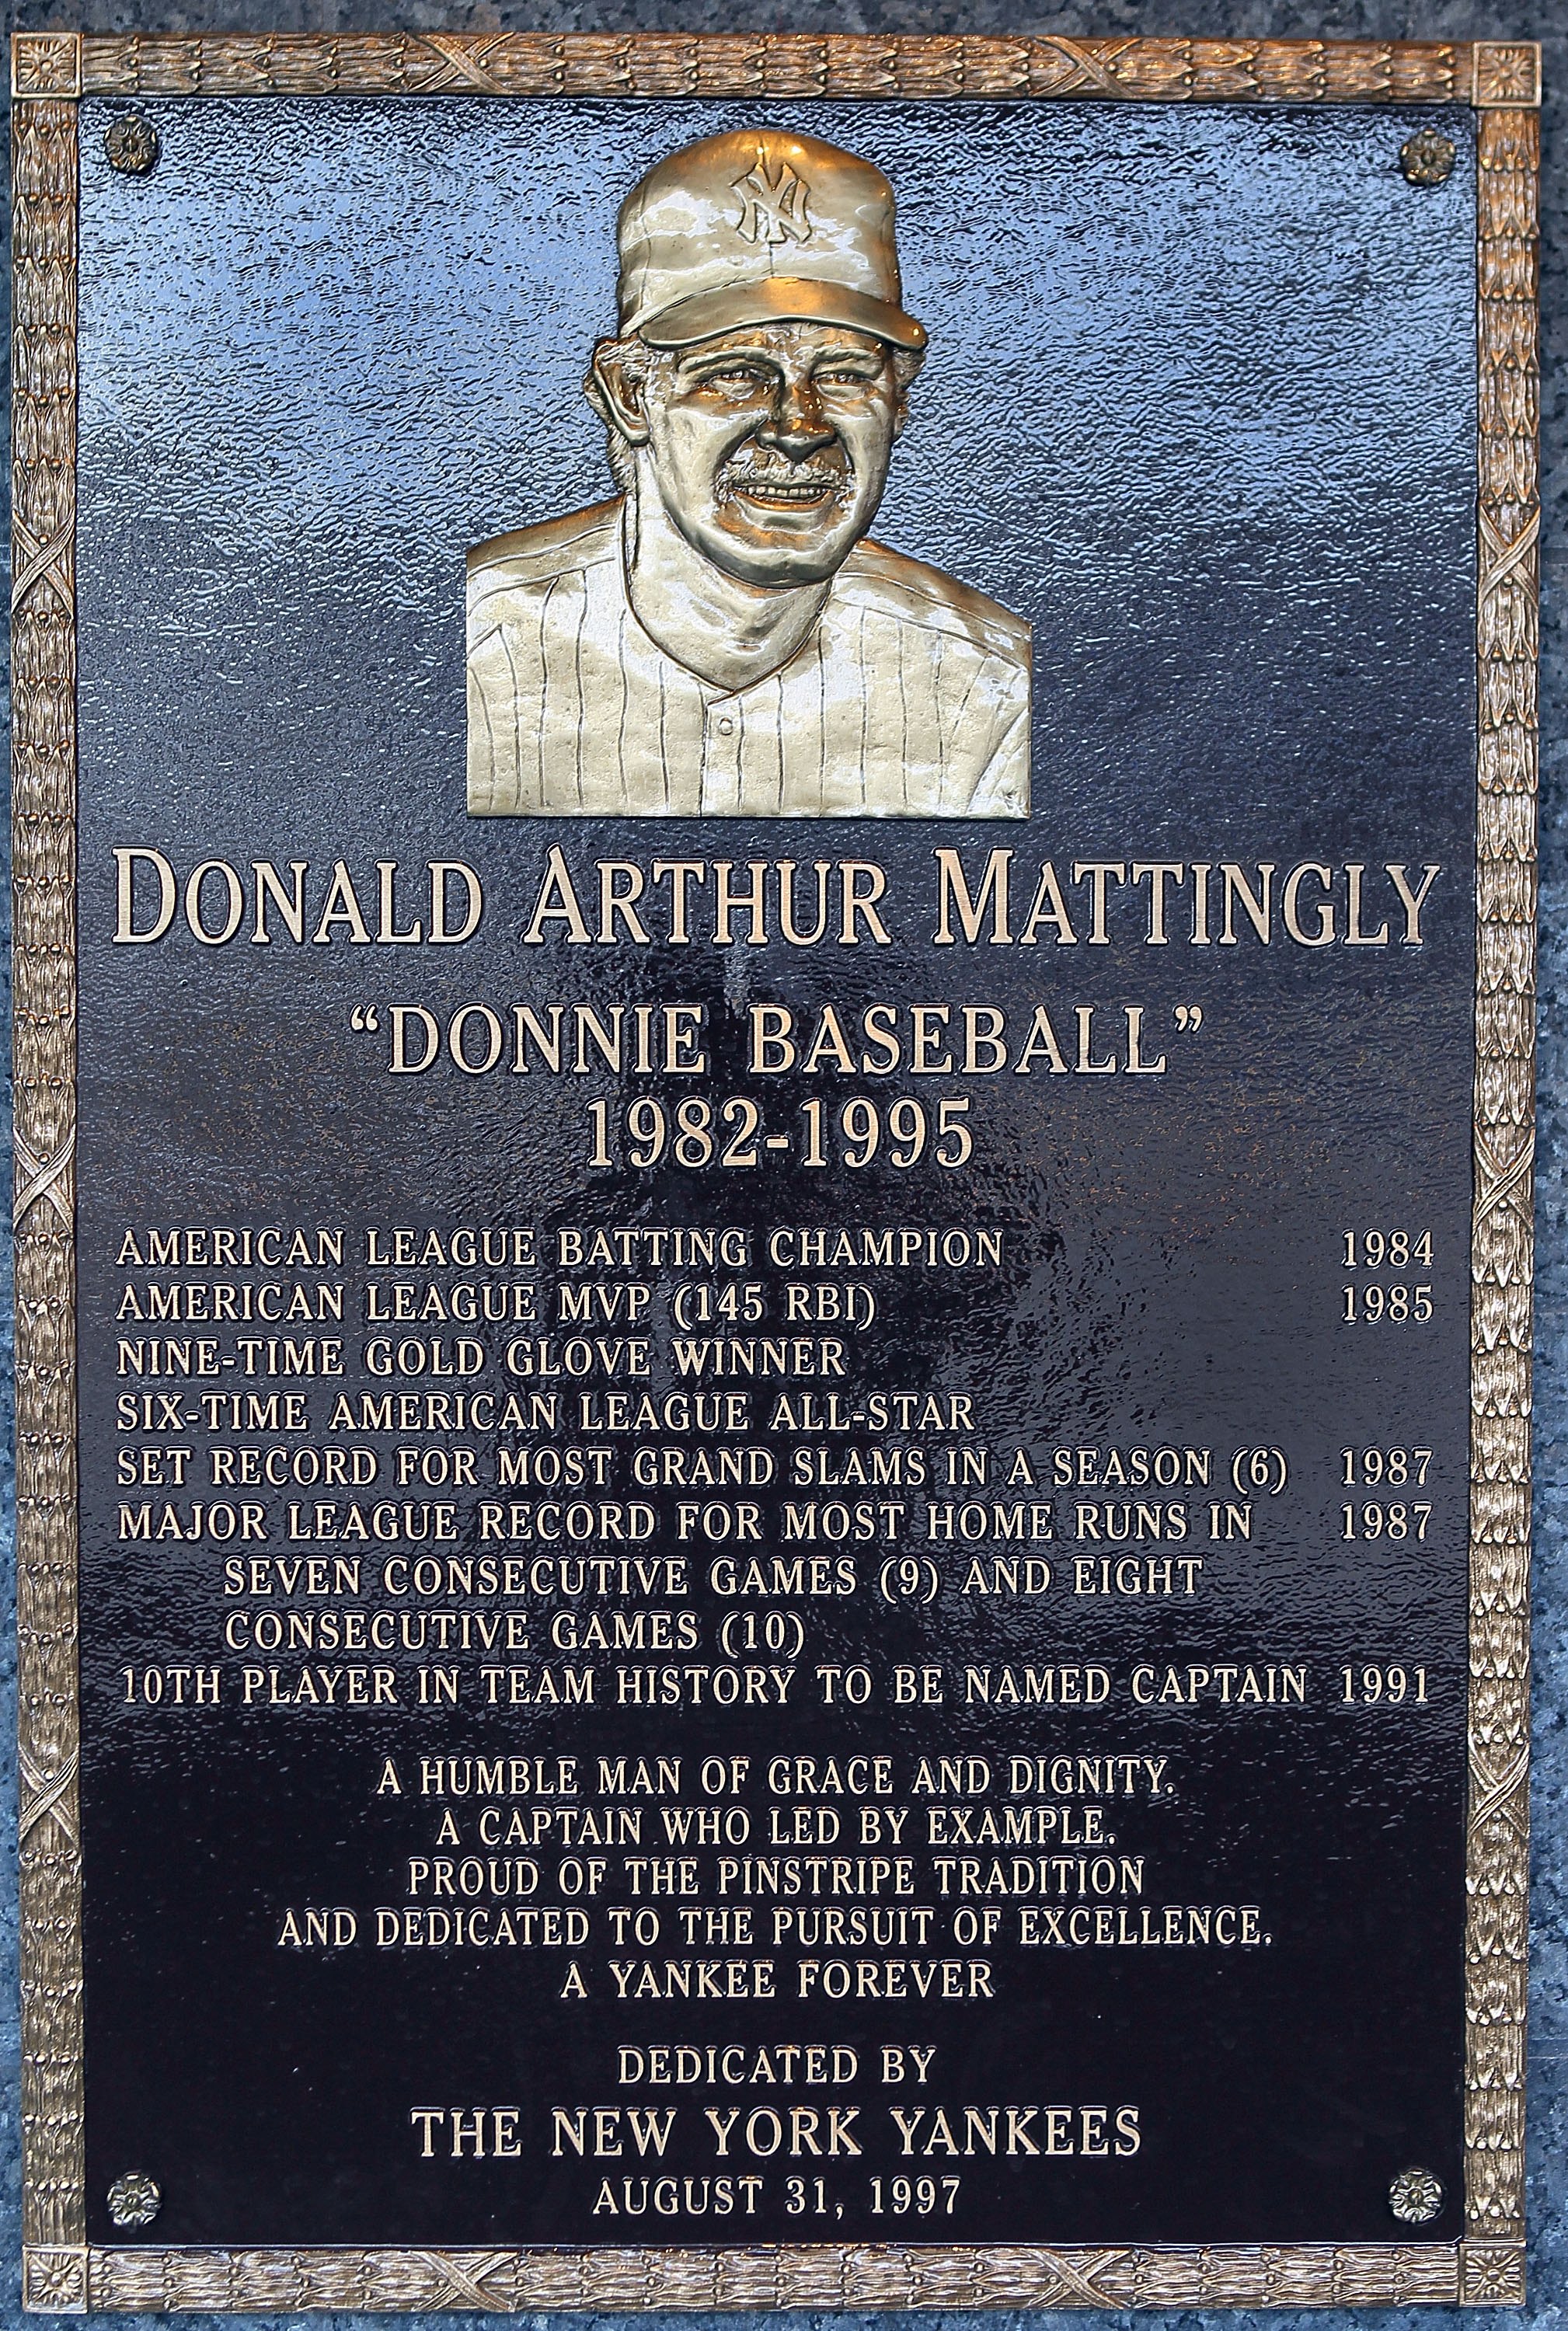 NEW YORK - MAY 02:  The plaque of Don Mattingly is seen in Monument Park at Yankee Stadium prior to the game between the New York Yankees and the Chicago White Sox on May 2, 2010 in the Bronx borough of New York City. The Yankees defeated the White Sox 12